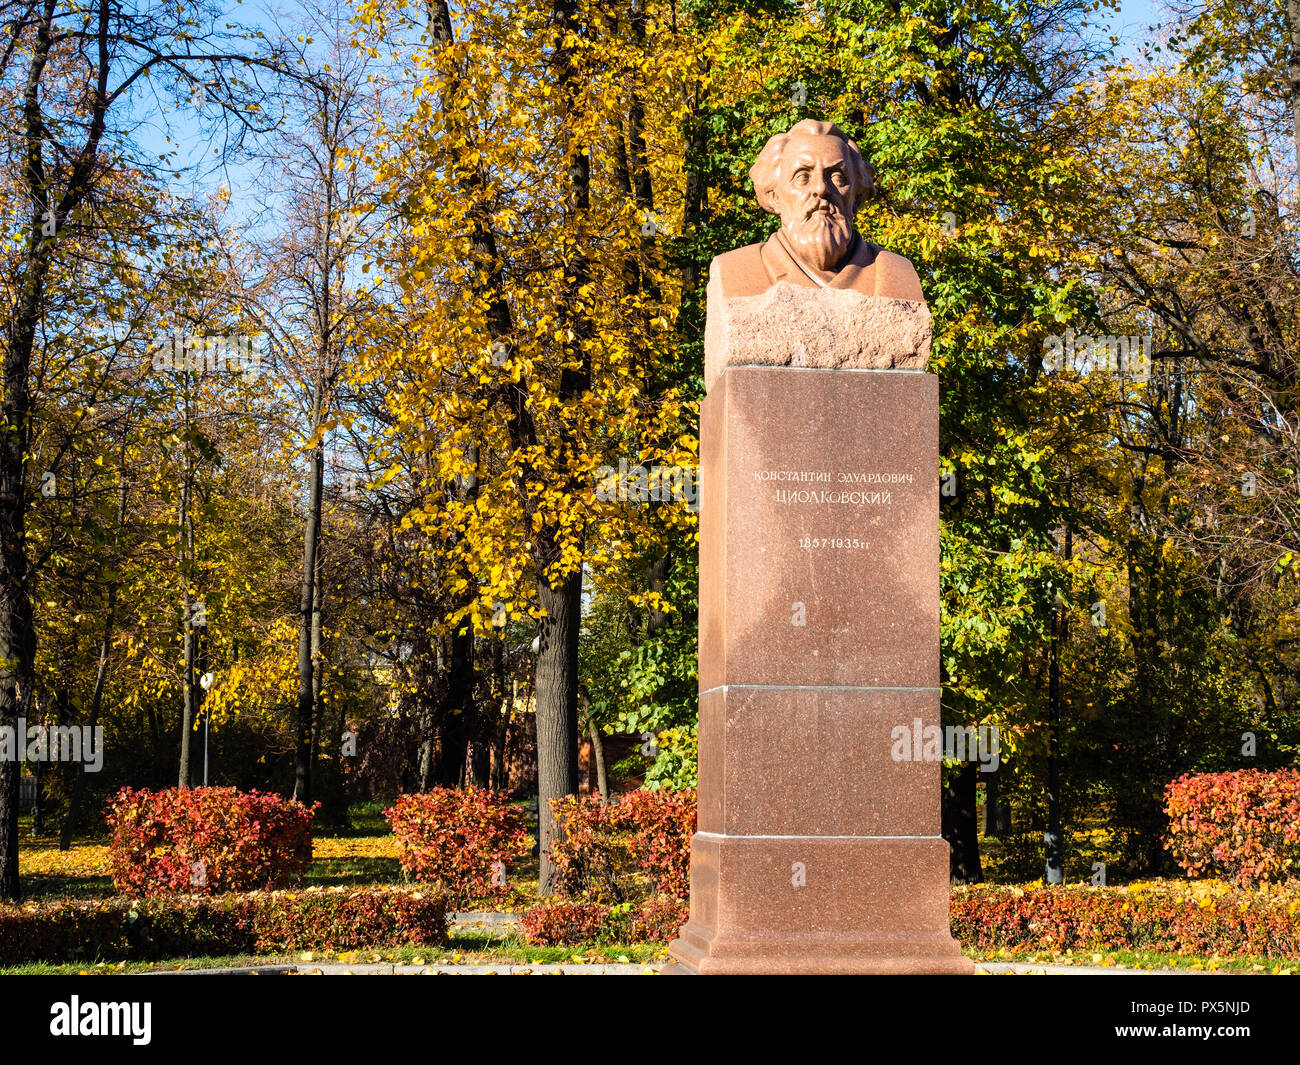 MOSCOW, RUSSIA - OCTOBER 16, 2018: Monument of K E Tsiolkovsky (rocket scientist and founder of the astronautic theory) in Petrovsky Park in Moscow ci Stock Photo